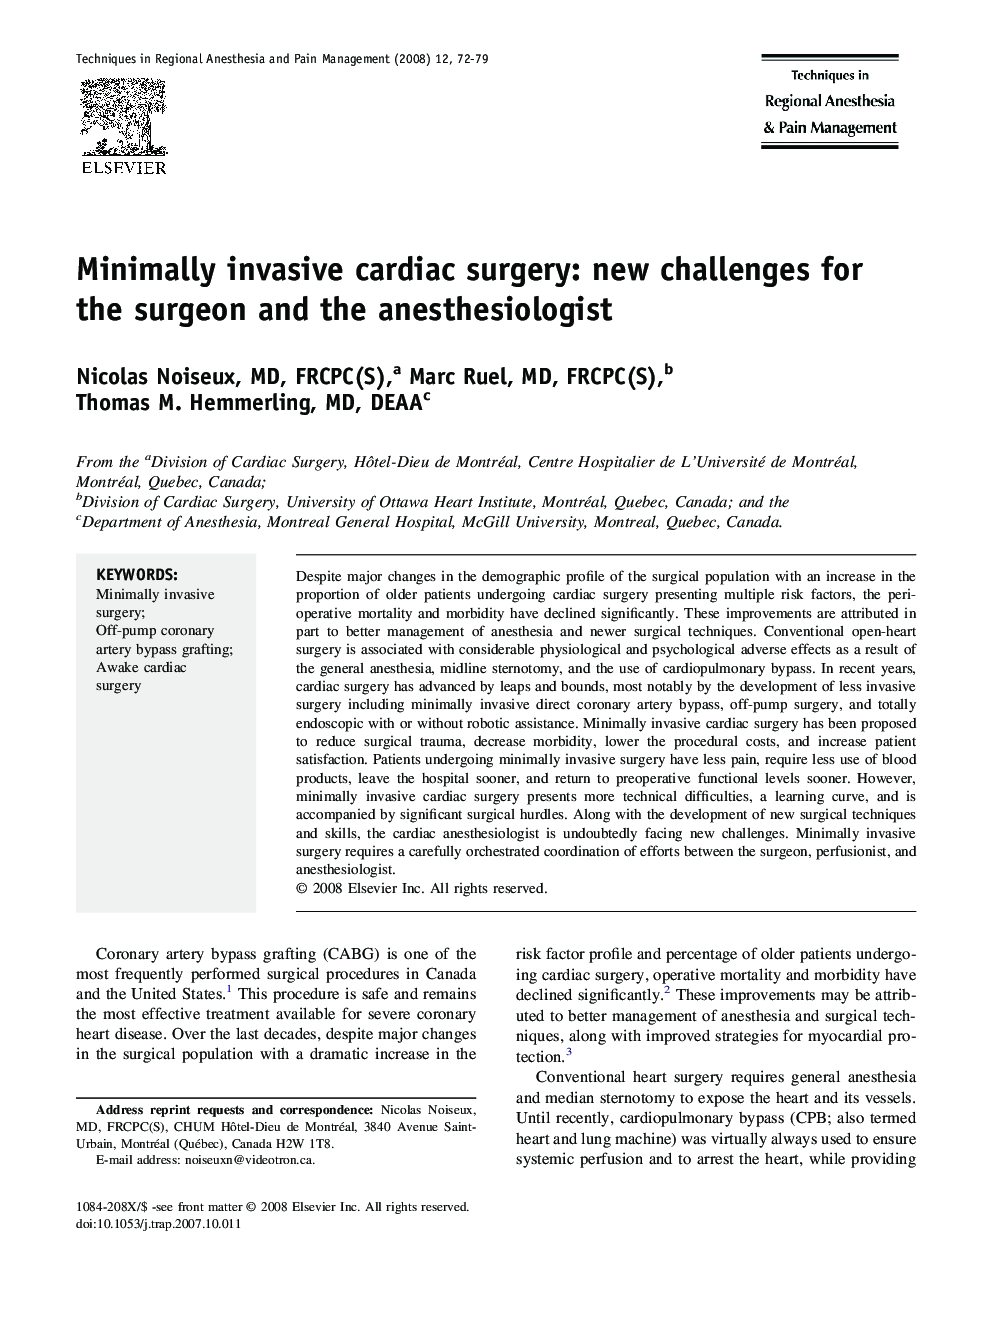 Minimally invasive cardiac surgery: new challenges for the surgeon and the anesthesiologist